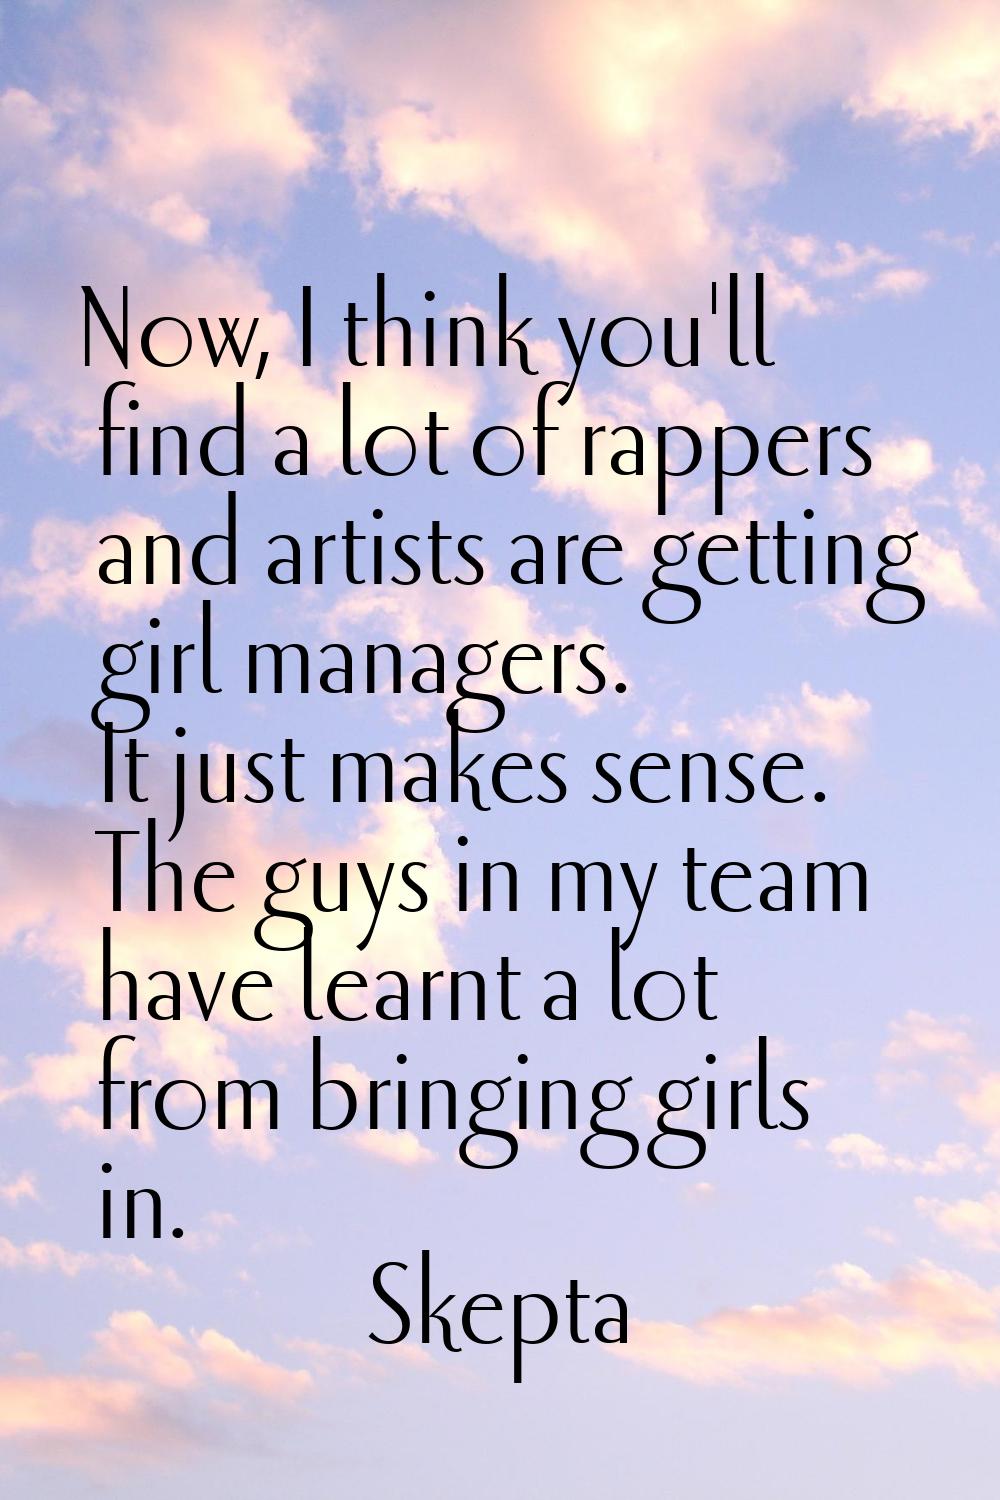 Now, I think you'll find a lot of rappers and artists are getting girl managers. It just makes sens